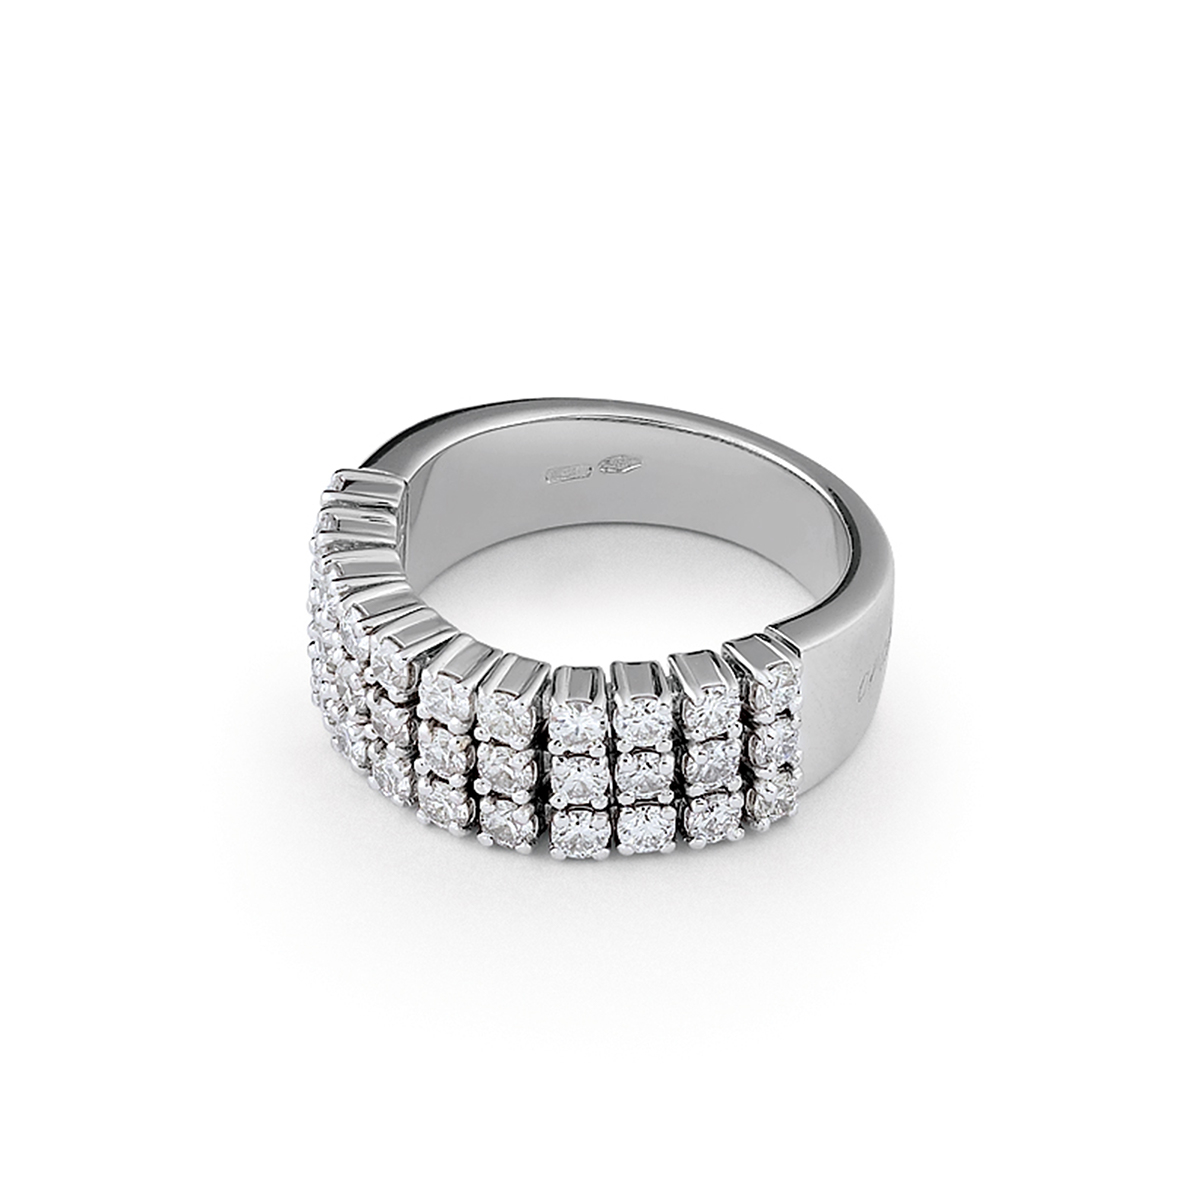 Ring with rigid shank and soft 3-row mesh